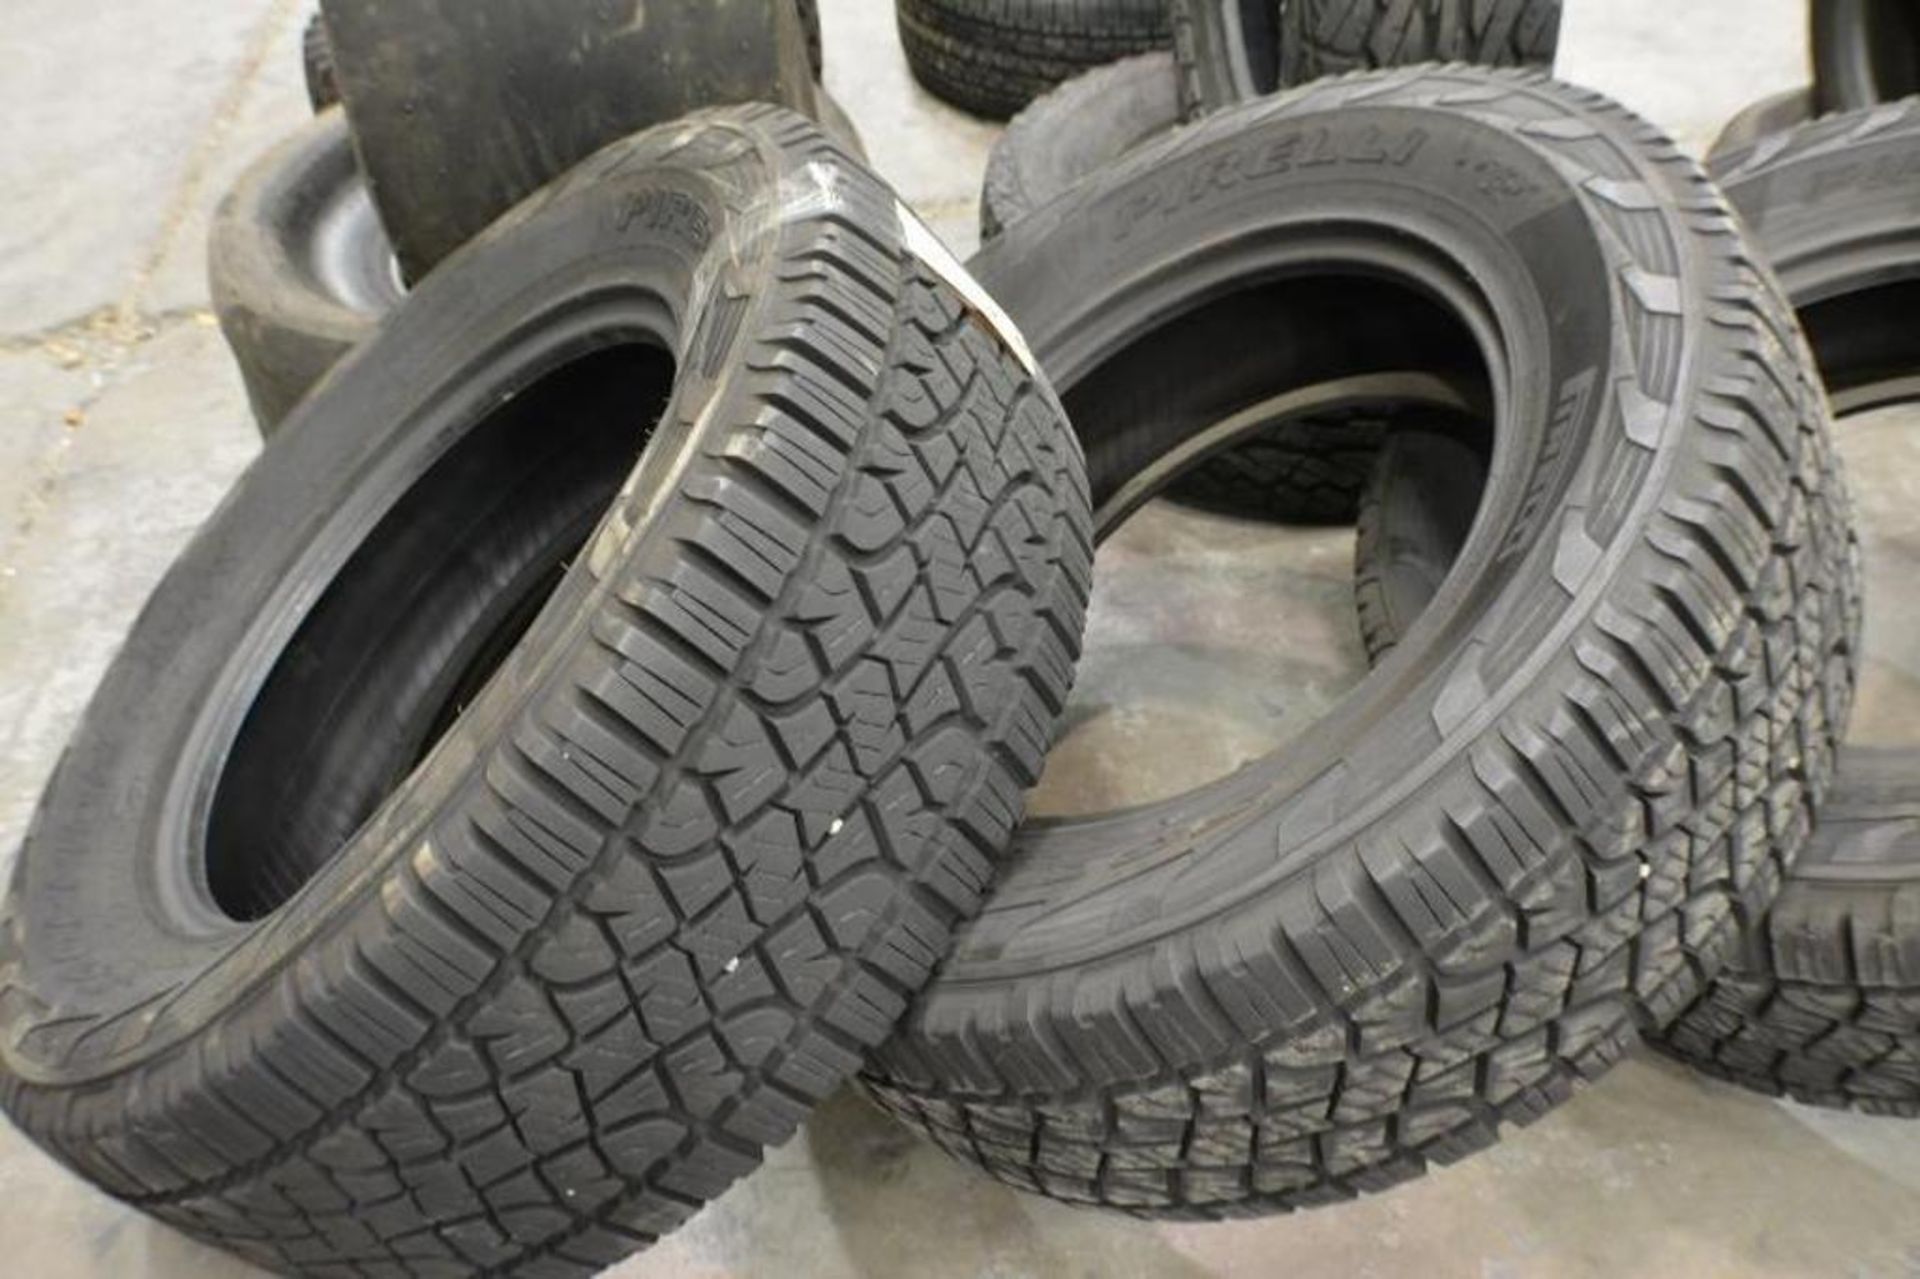 Tires. Set of 4 Tires. LT 325/60 R20 ATR by Pirelli - Image 2 of 8